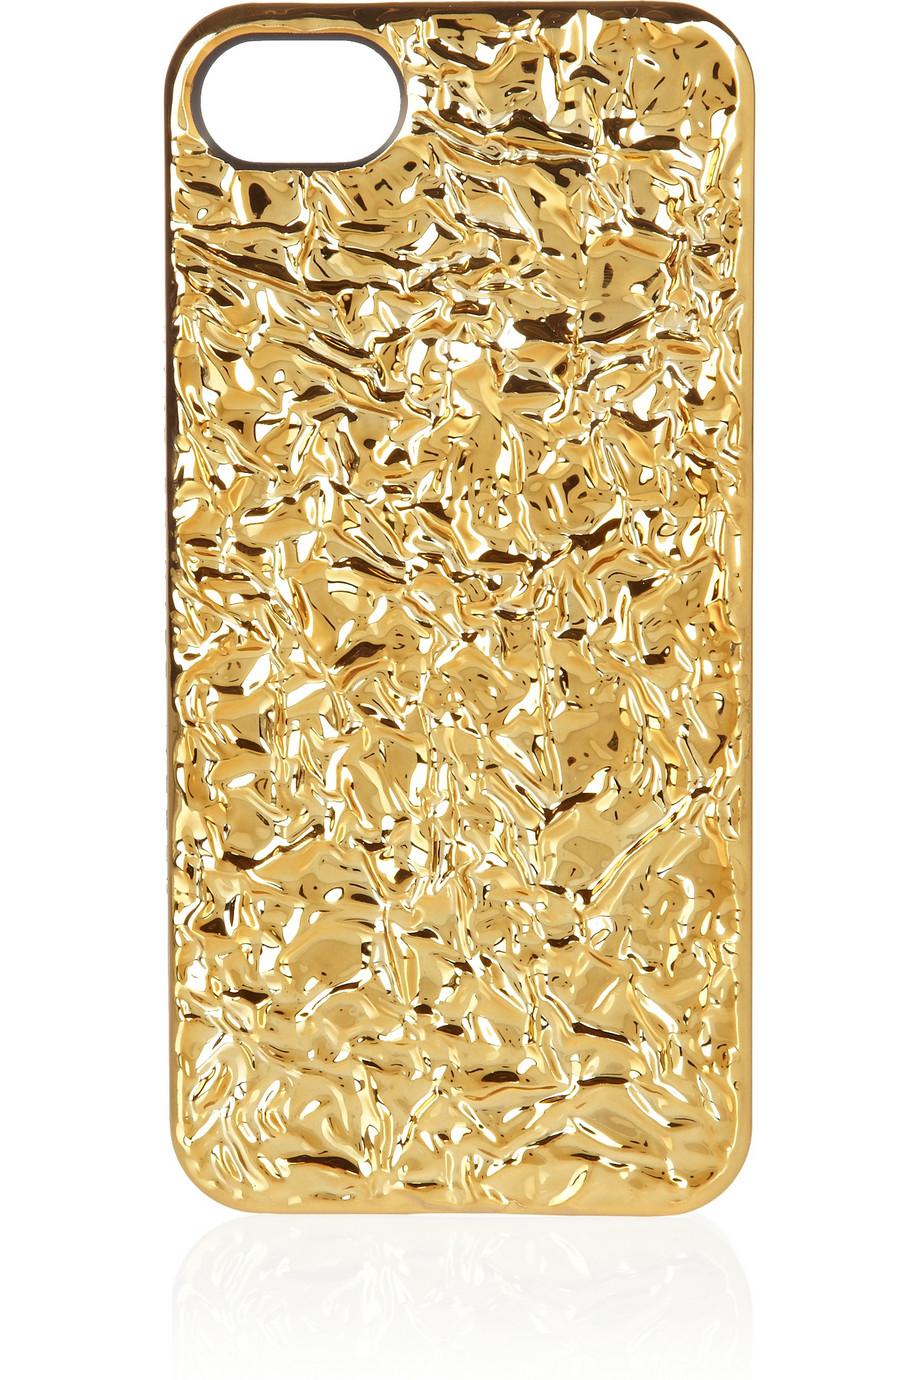 Pearls of Style: Must Have. Marc by Marc Jacobs 3D iPhone 5 case